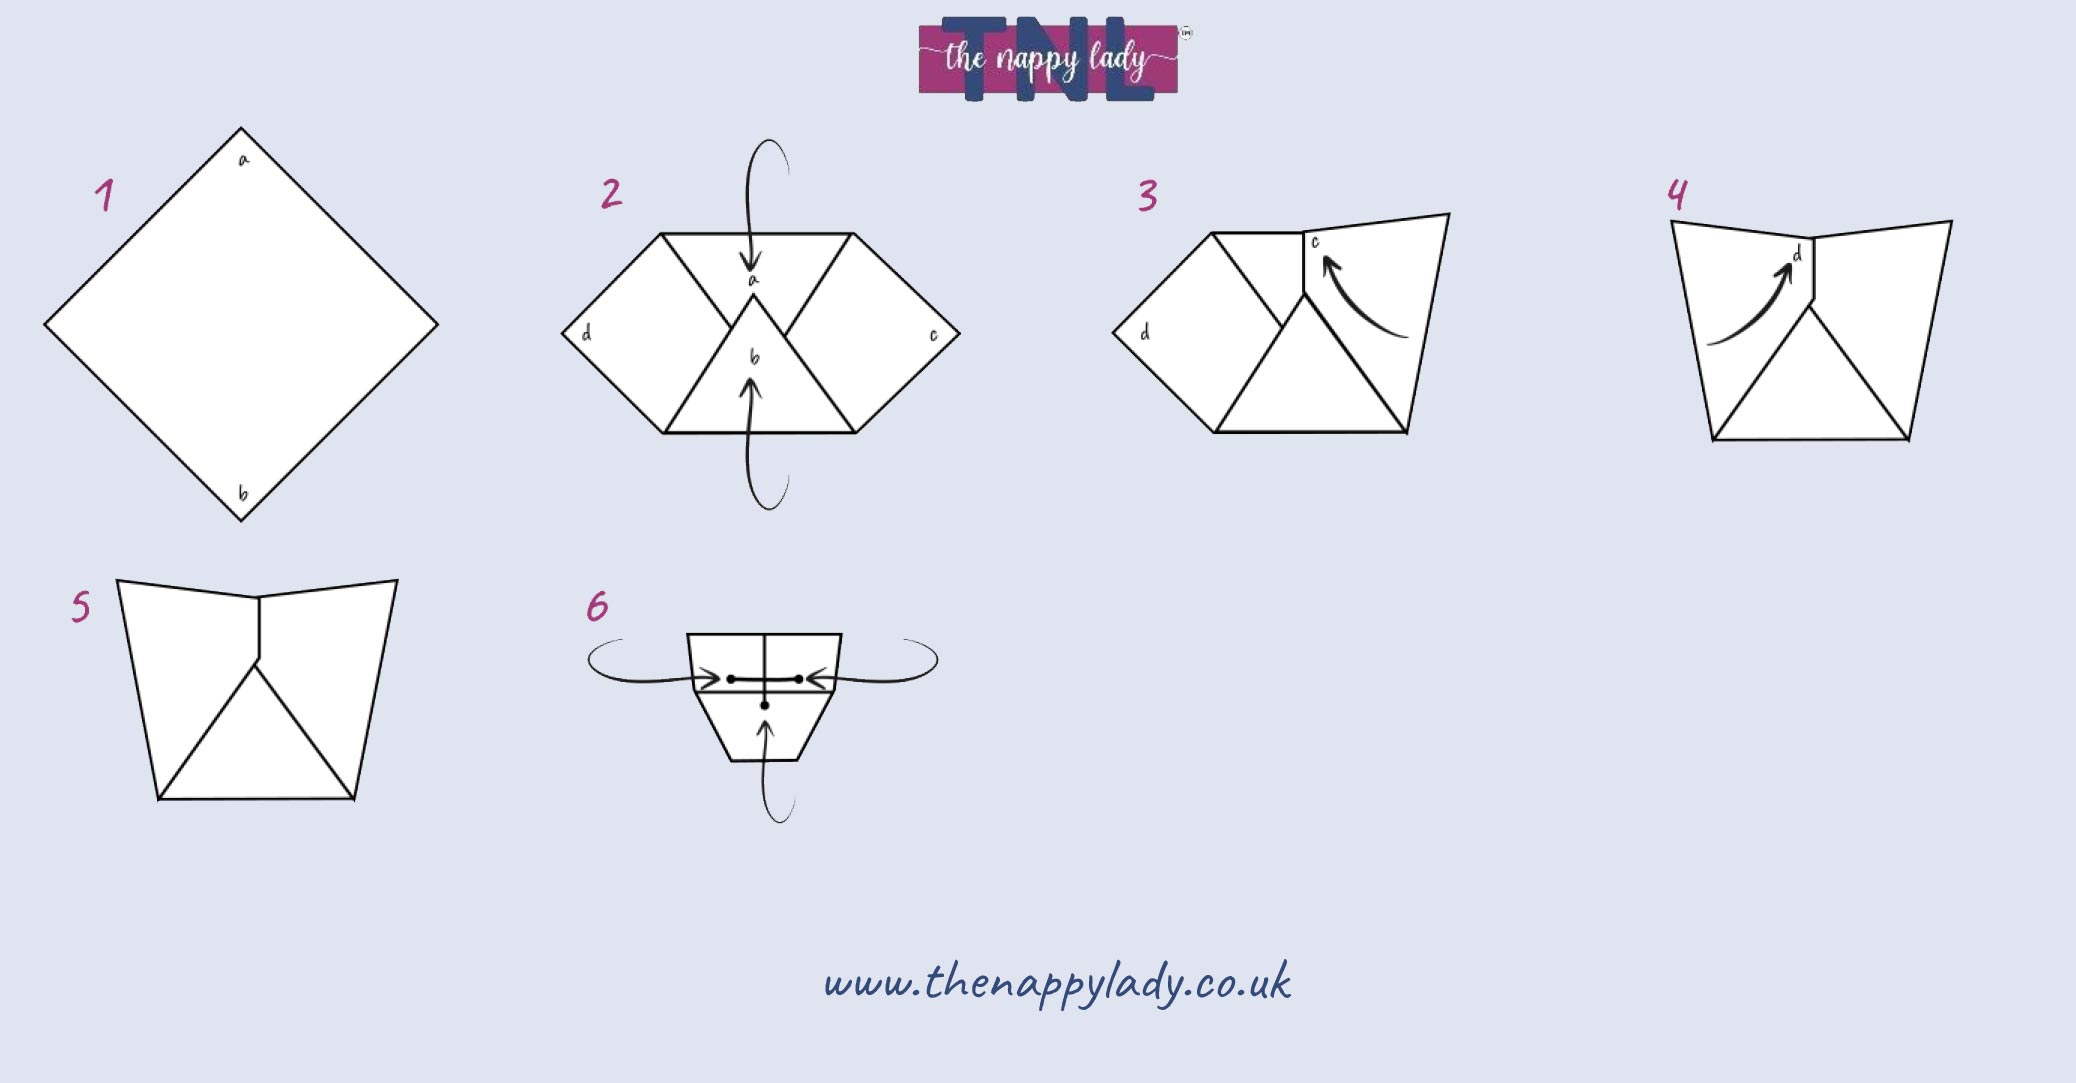 folding guide for the neat terry nappy fold